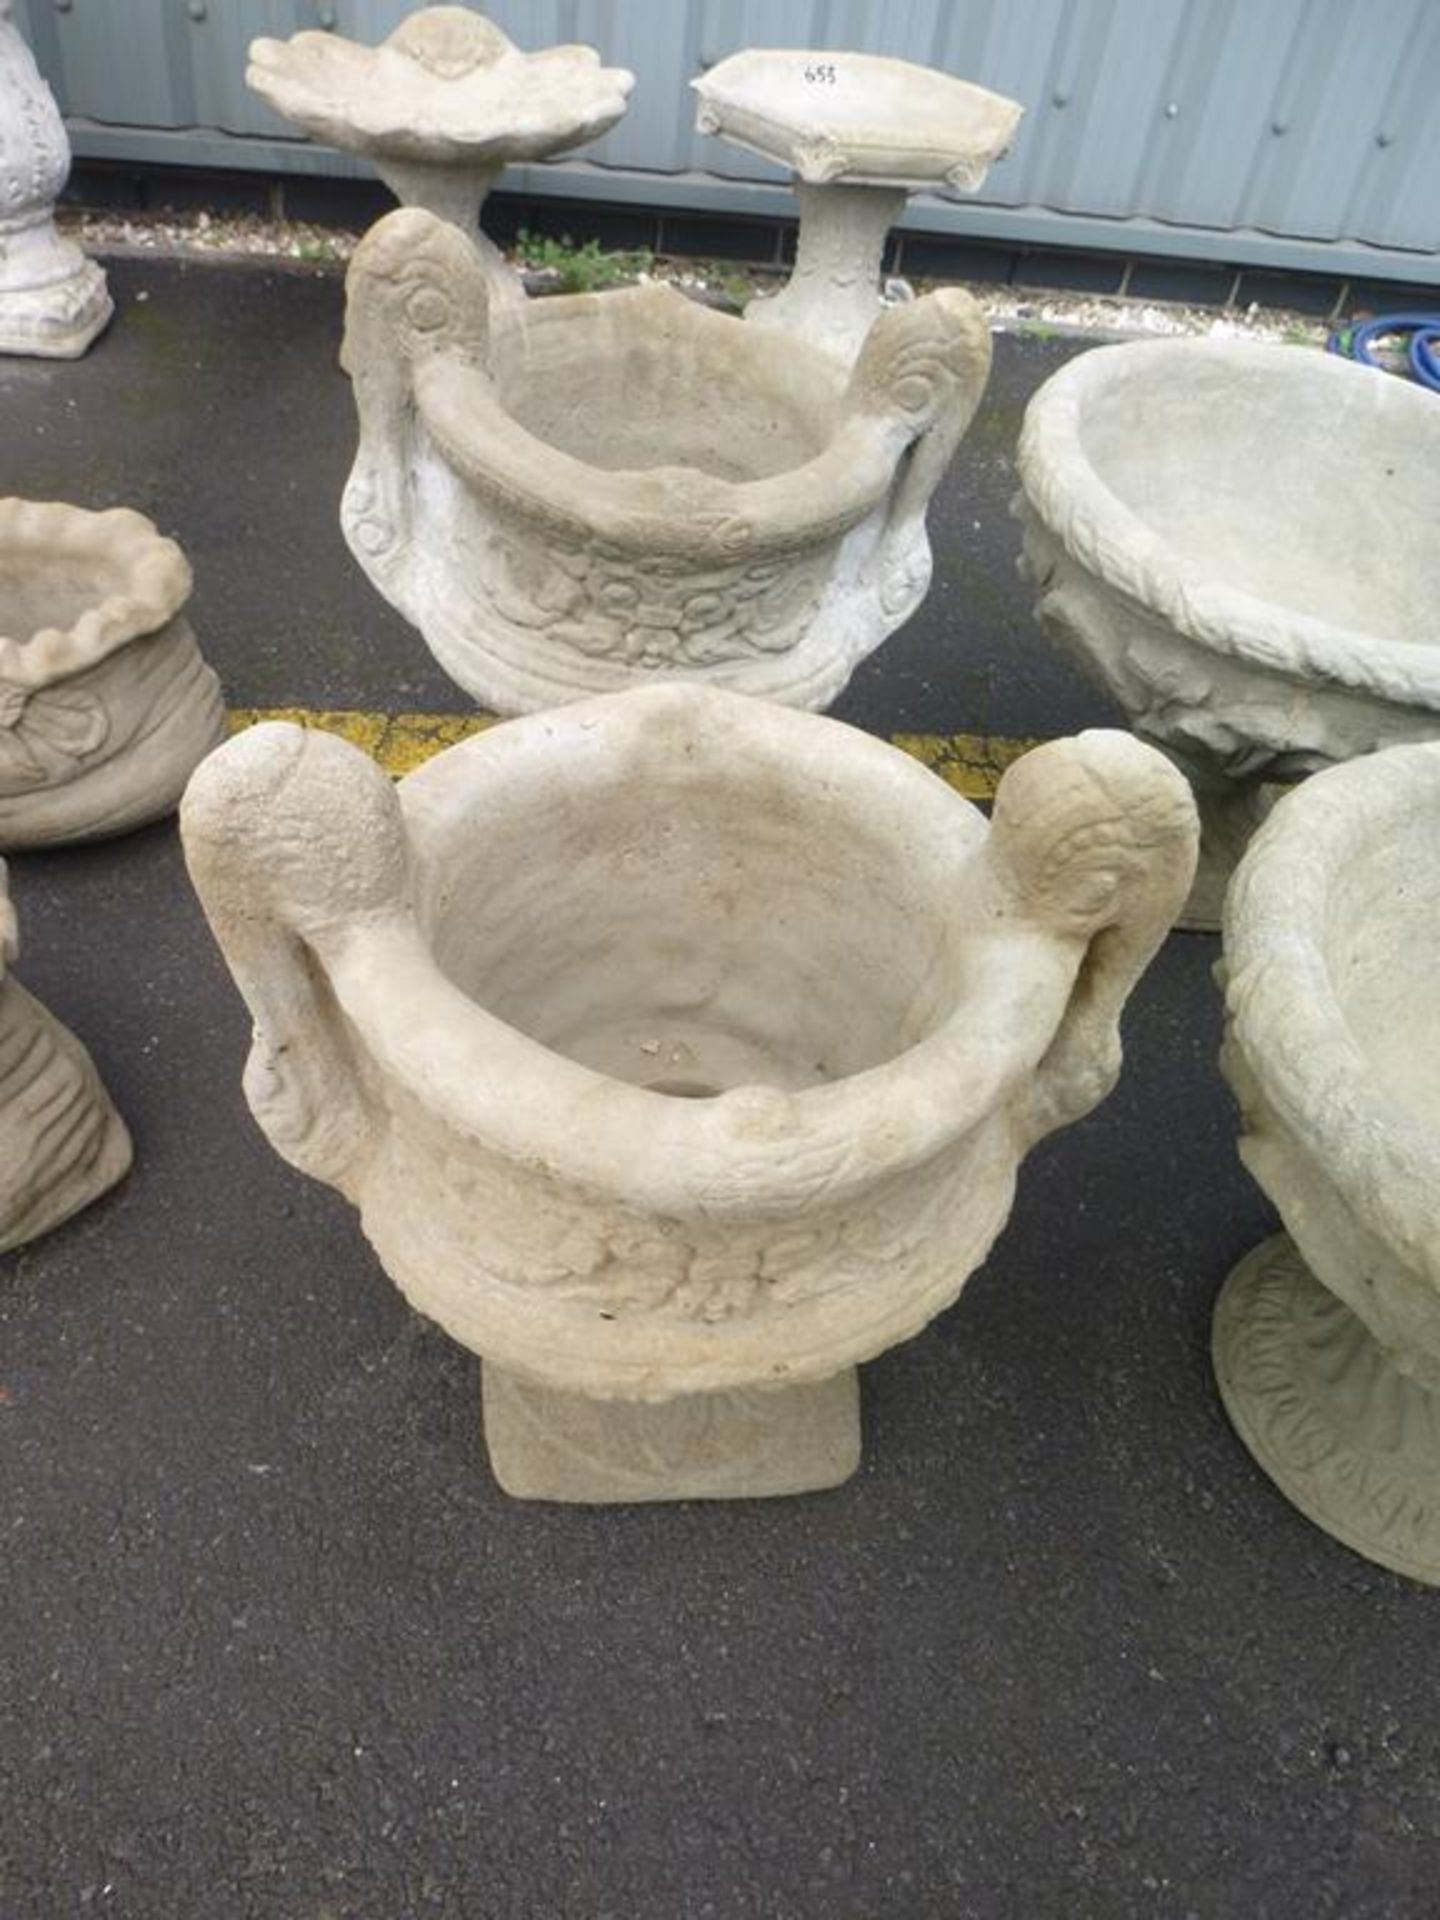 2 x Two-Handled Urns